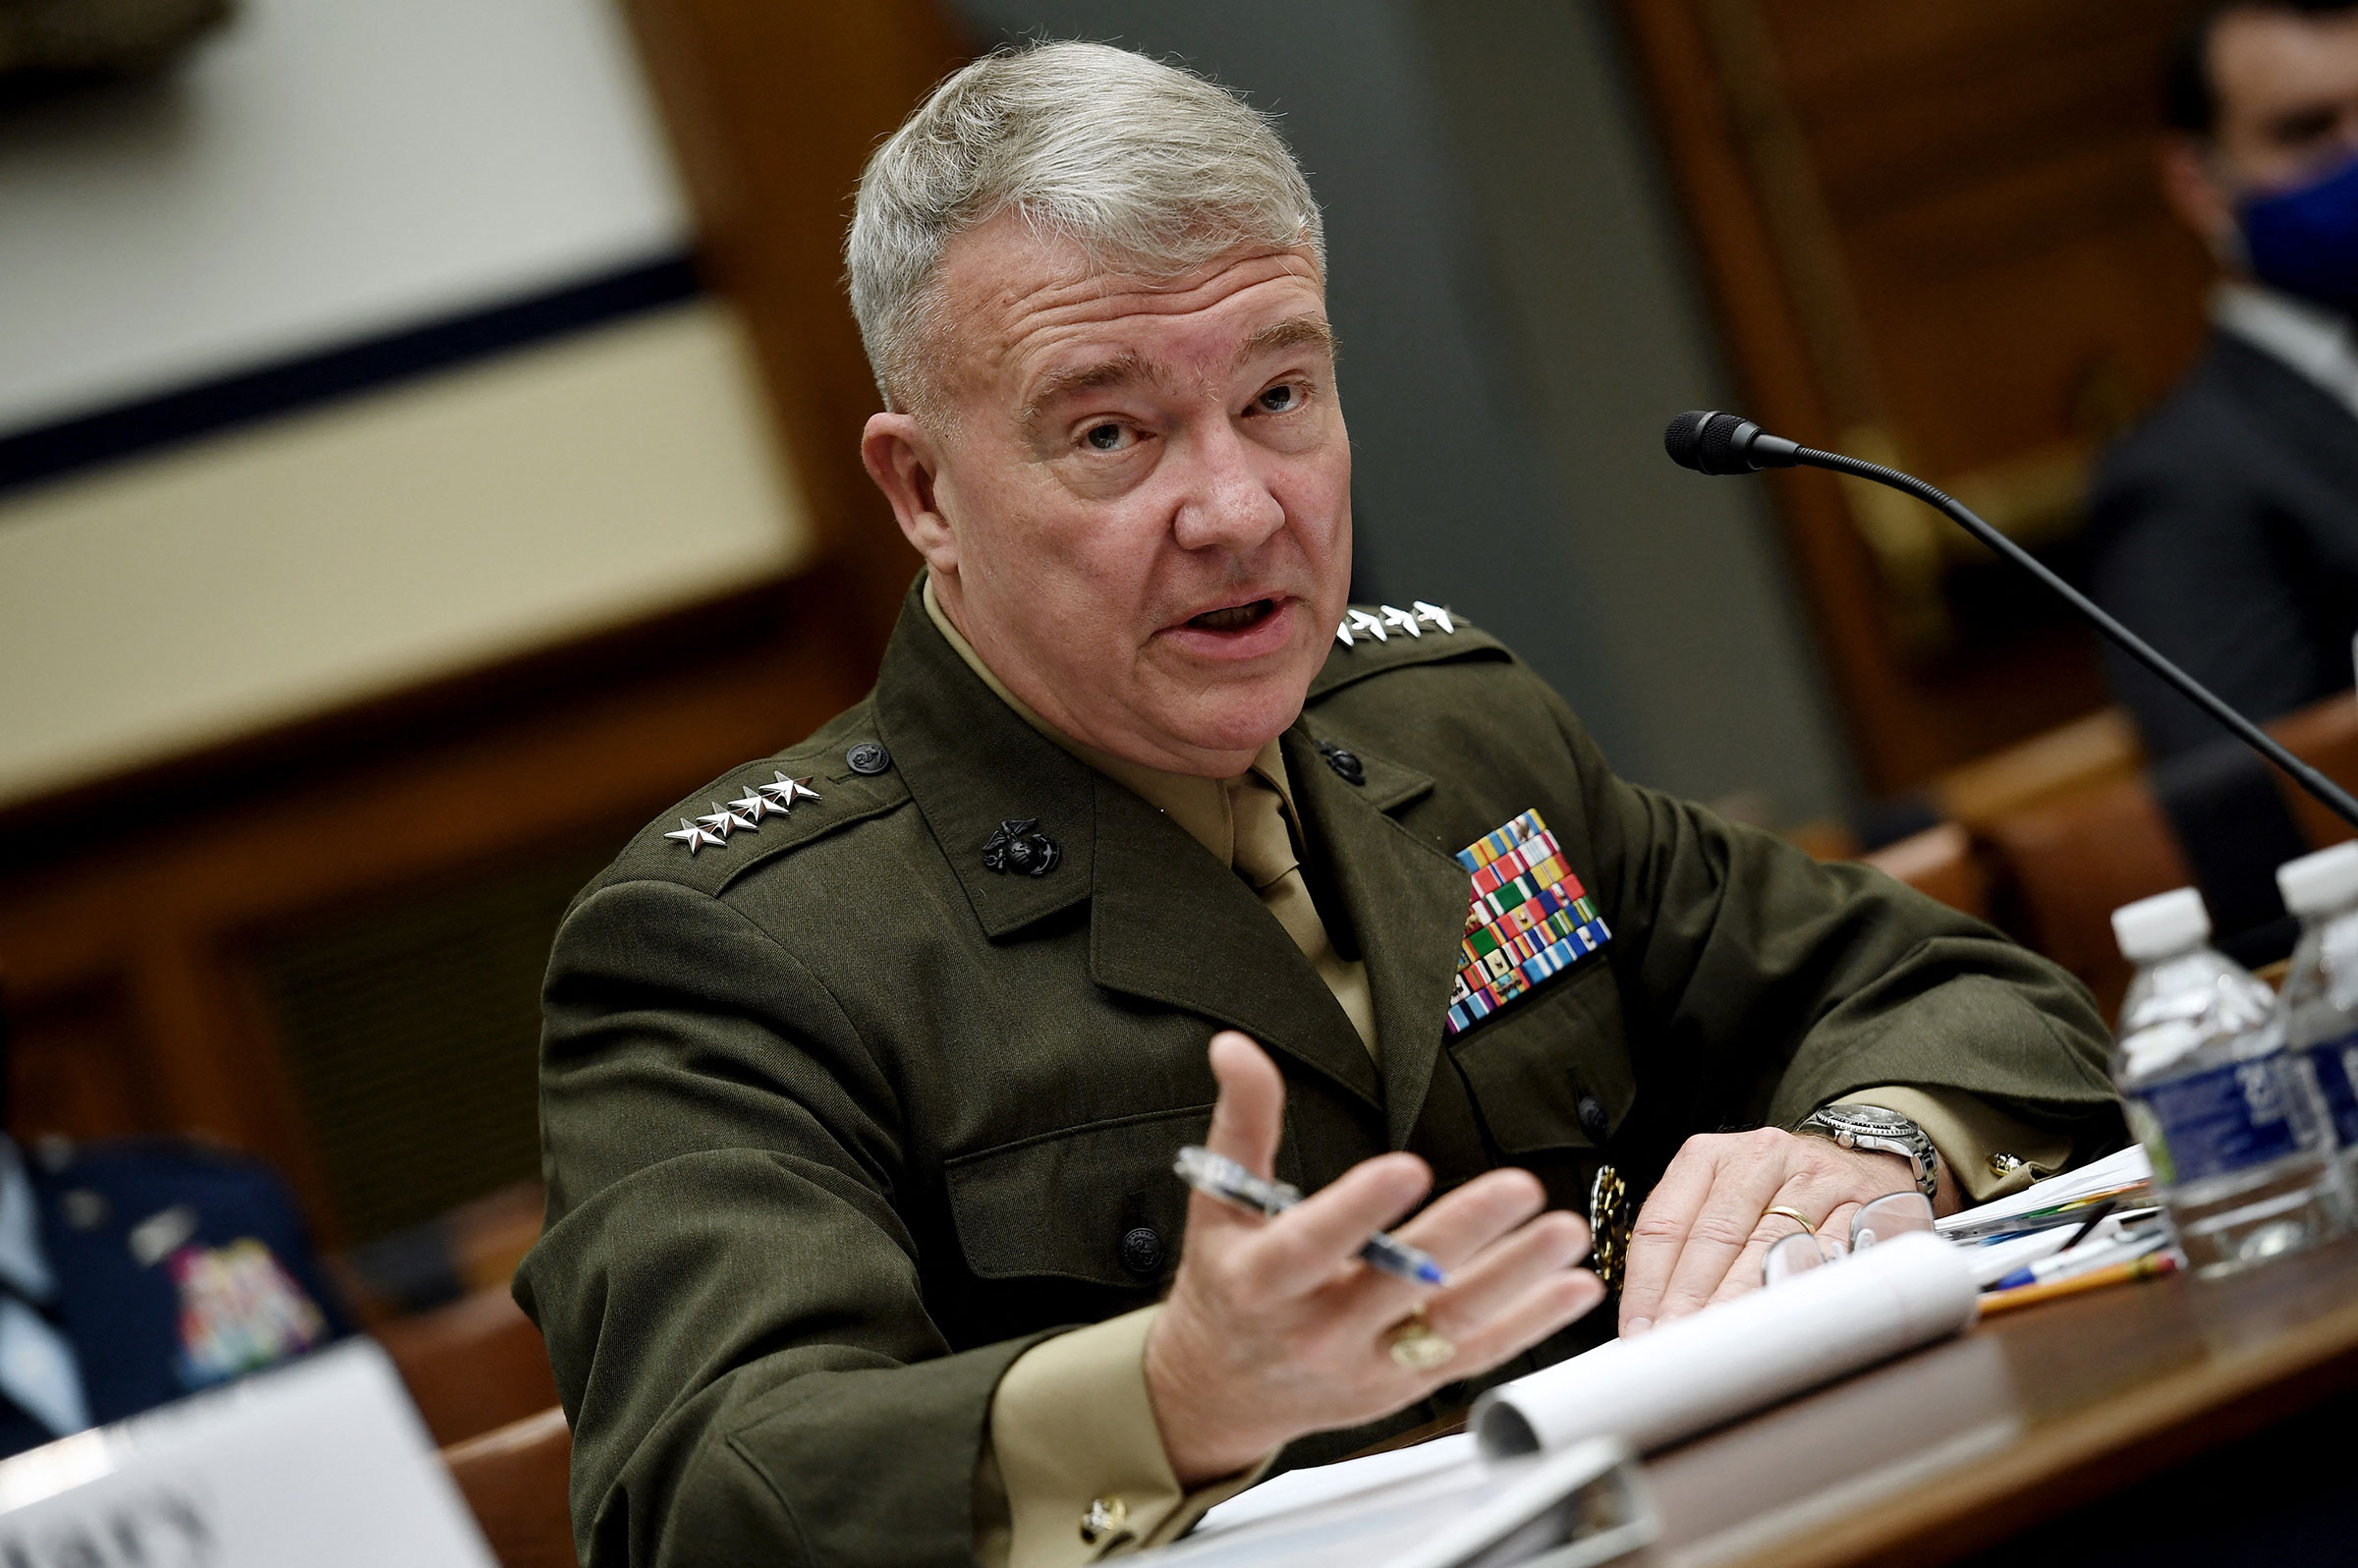 General Kenneth McKenzie Jr. responds to questions during a House Armed Services Committee hearing on the conclusion of military operations in Afghanistan on Capitol Hill in Washington, on Sept. 29, 2021. (Olivier Douliery—AFP via Getty Images)